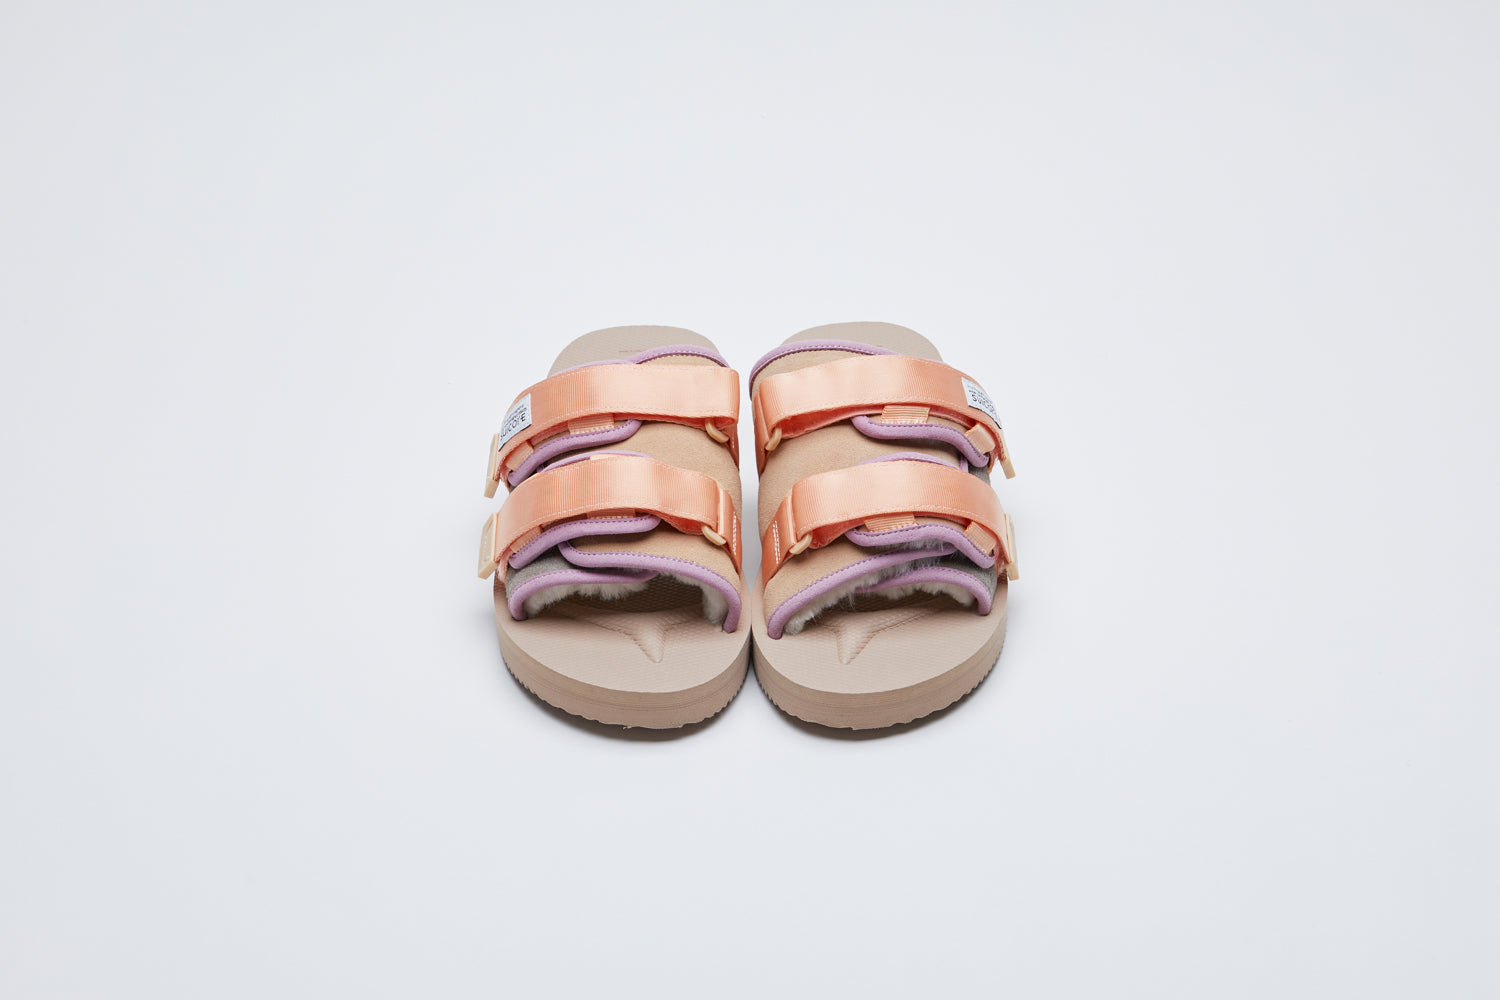 SUICOKE MOTO-Mab suede slides with beige midsole and sole, gray suede upper and shearling inside with light purple piping and light pink nylon straps. From Fall/Winter 2021 collection on SUICOKE Official US & Canada Webstore.